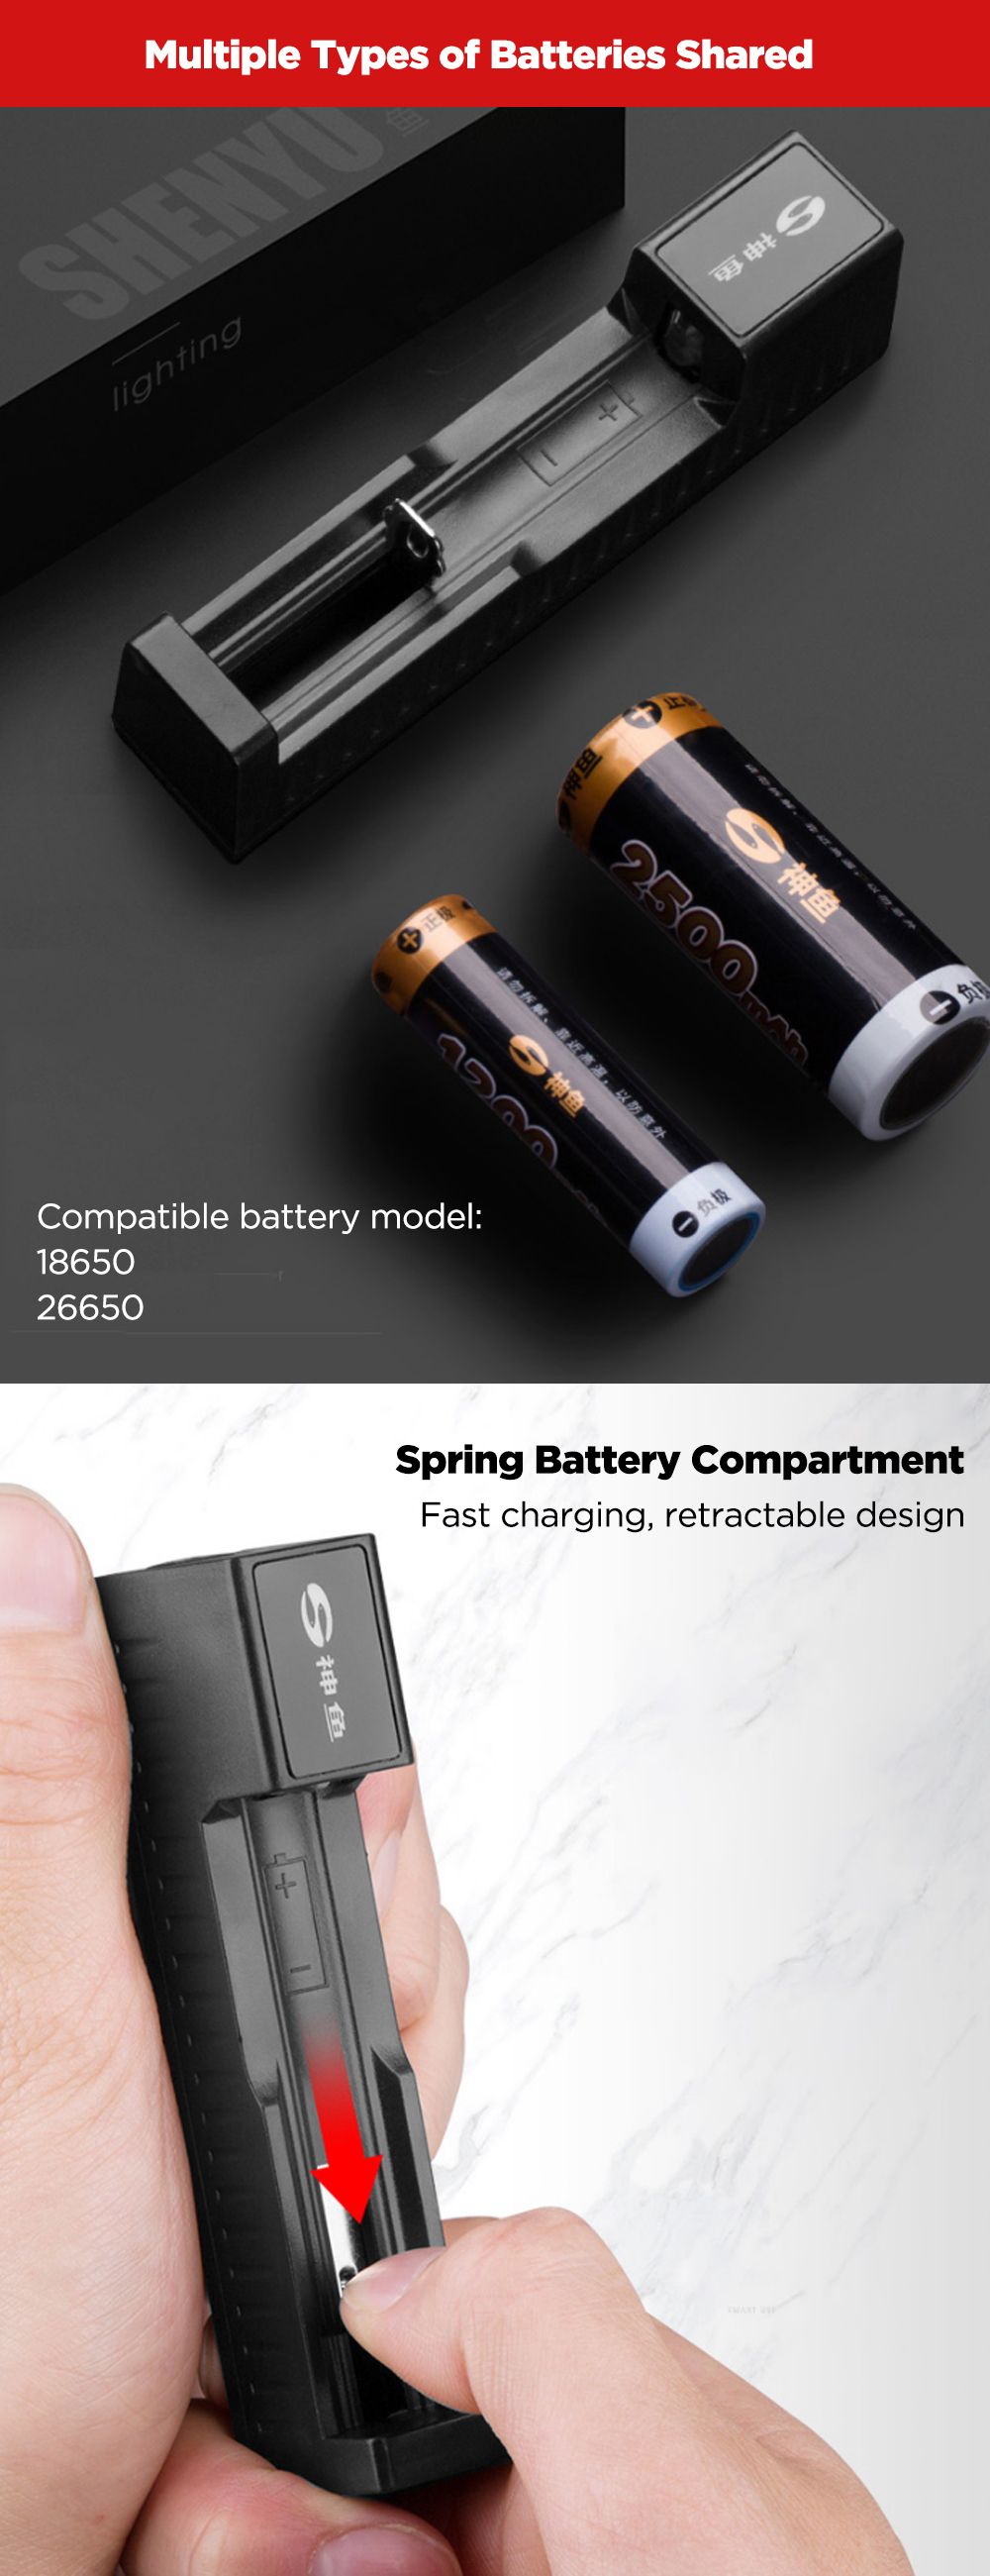 SHENYU-42V-1A-Intelligent-USB-Charging-Battery-Charger-1-Slot-Portable-Mini-Battery-Charger-For-1865-1759879